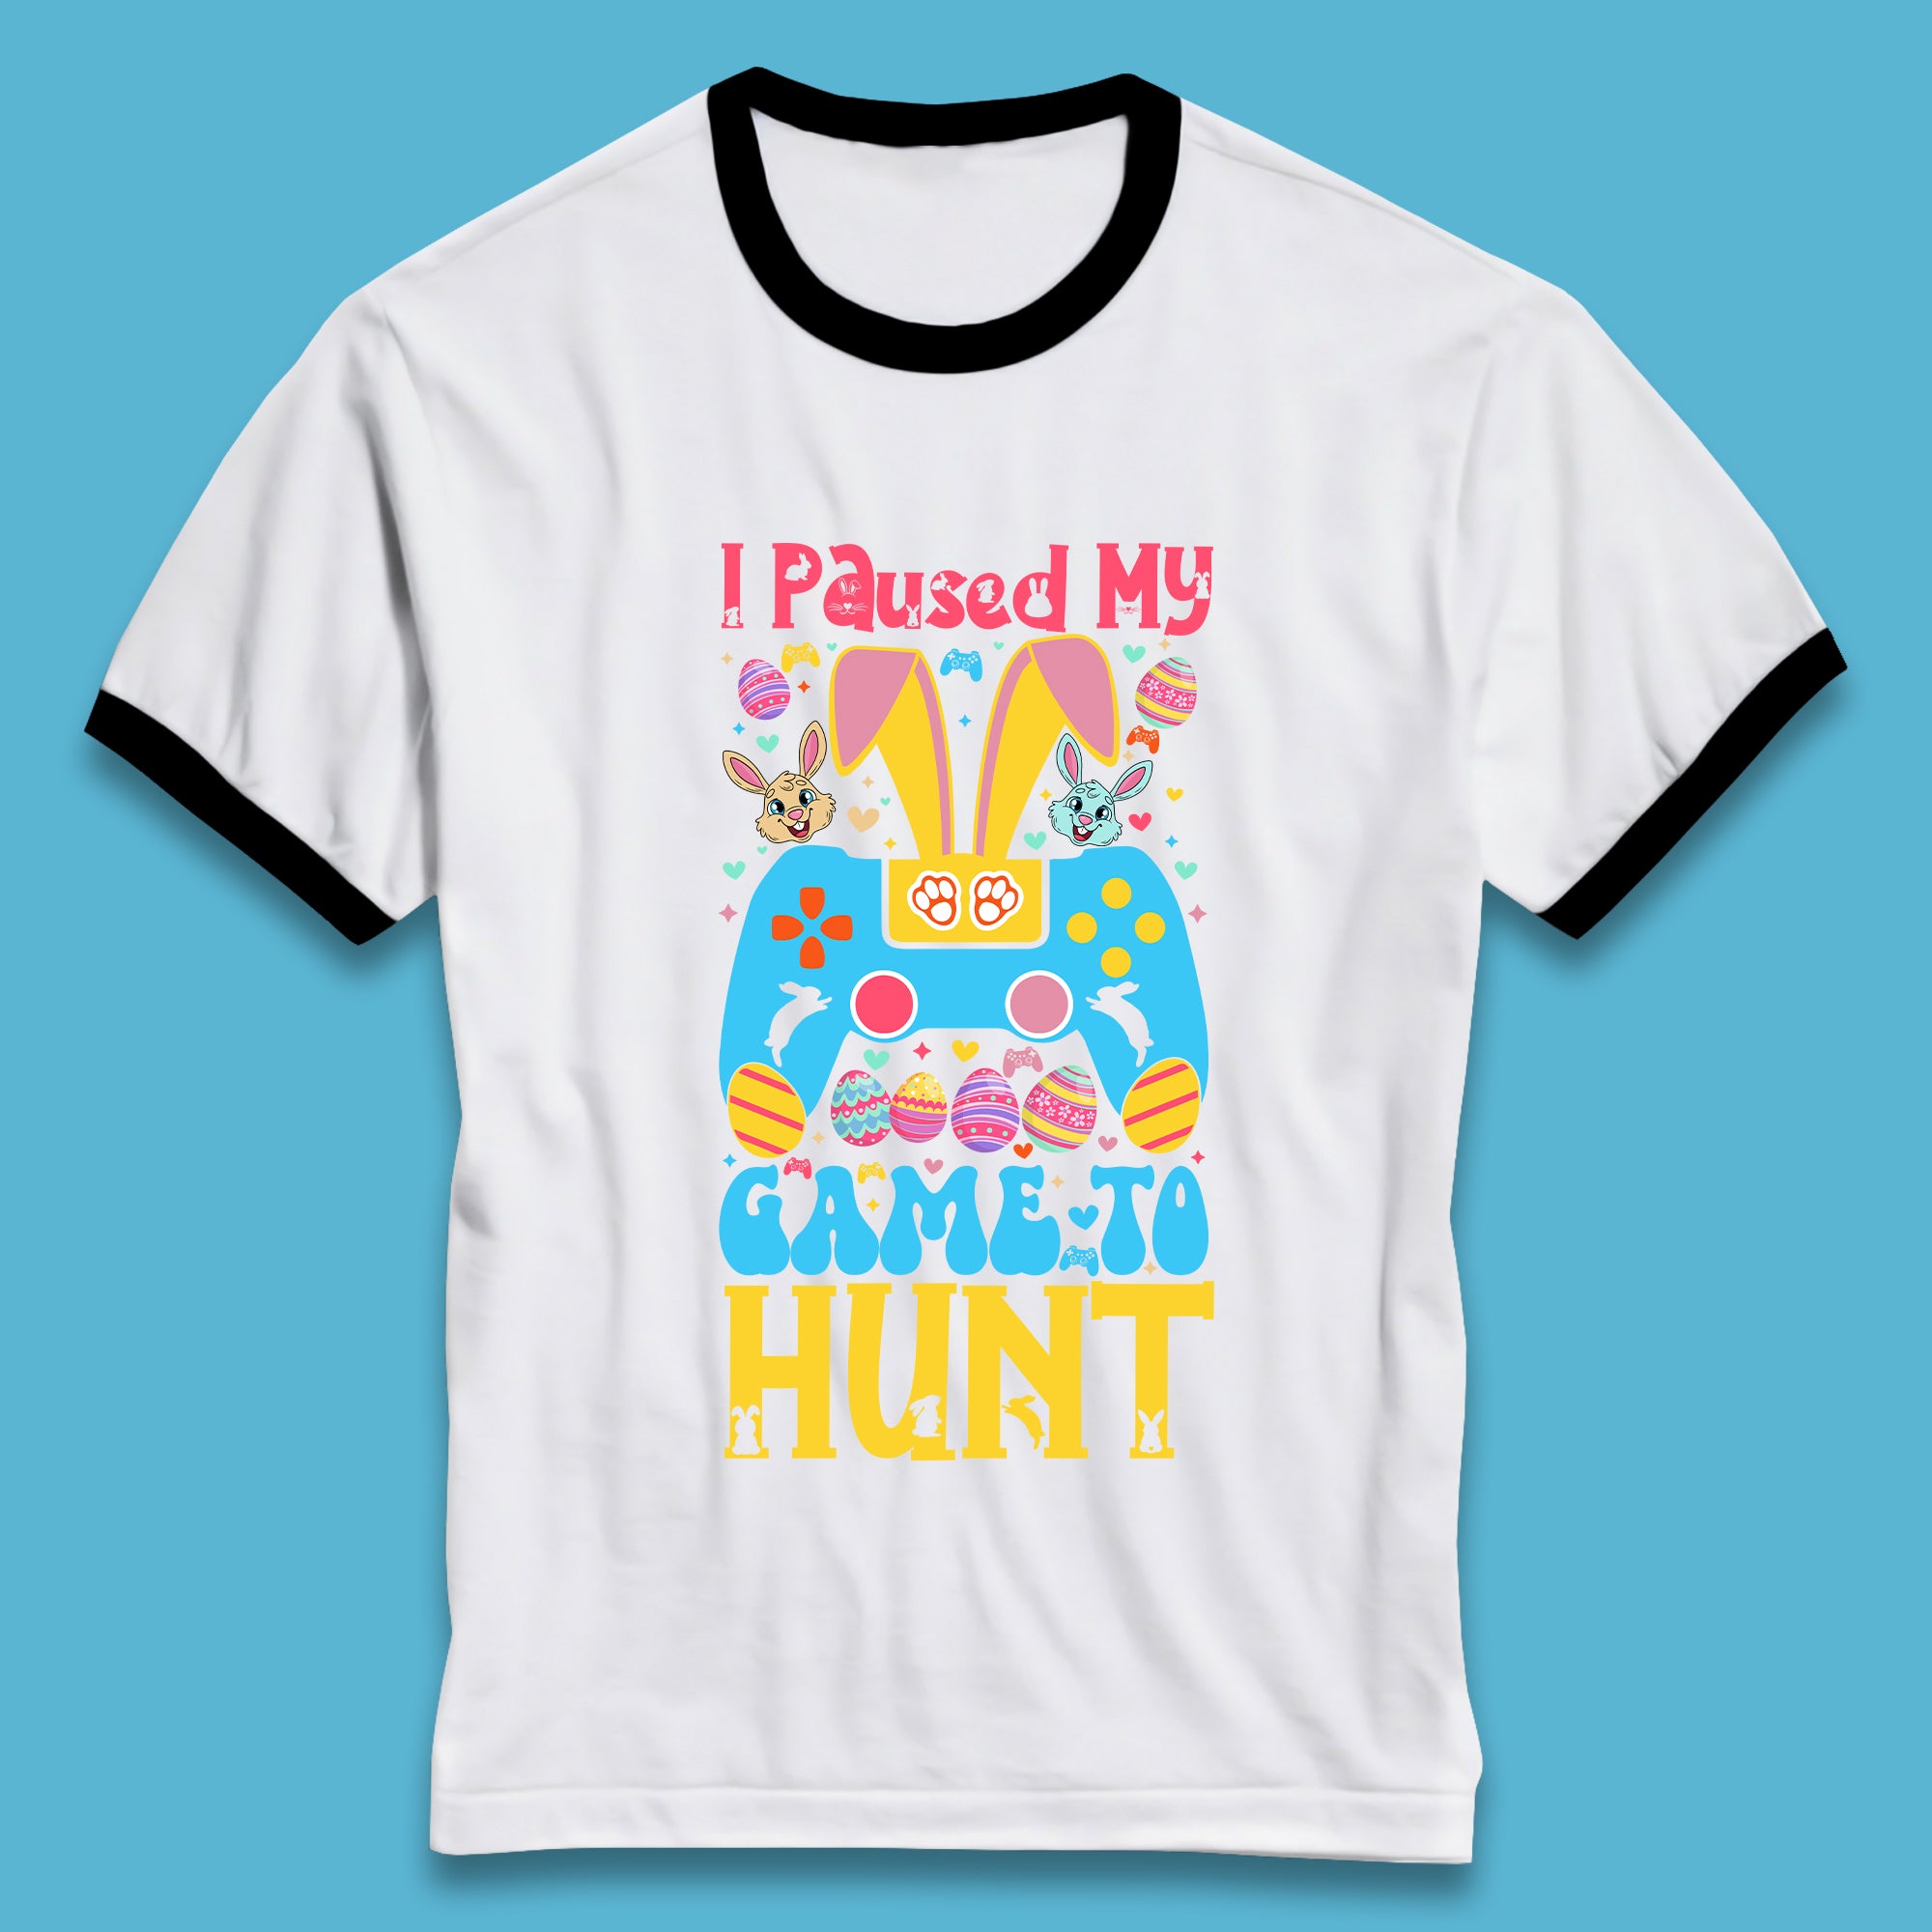 I Paused My Game To Hunt Ringer T-Shirt